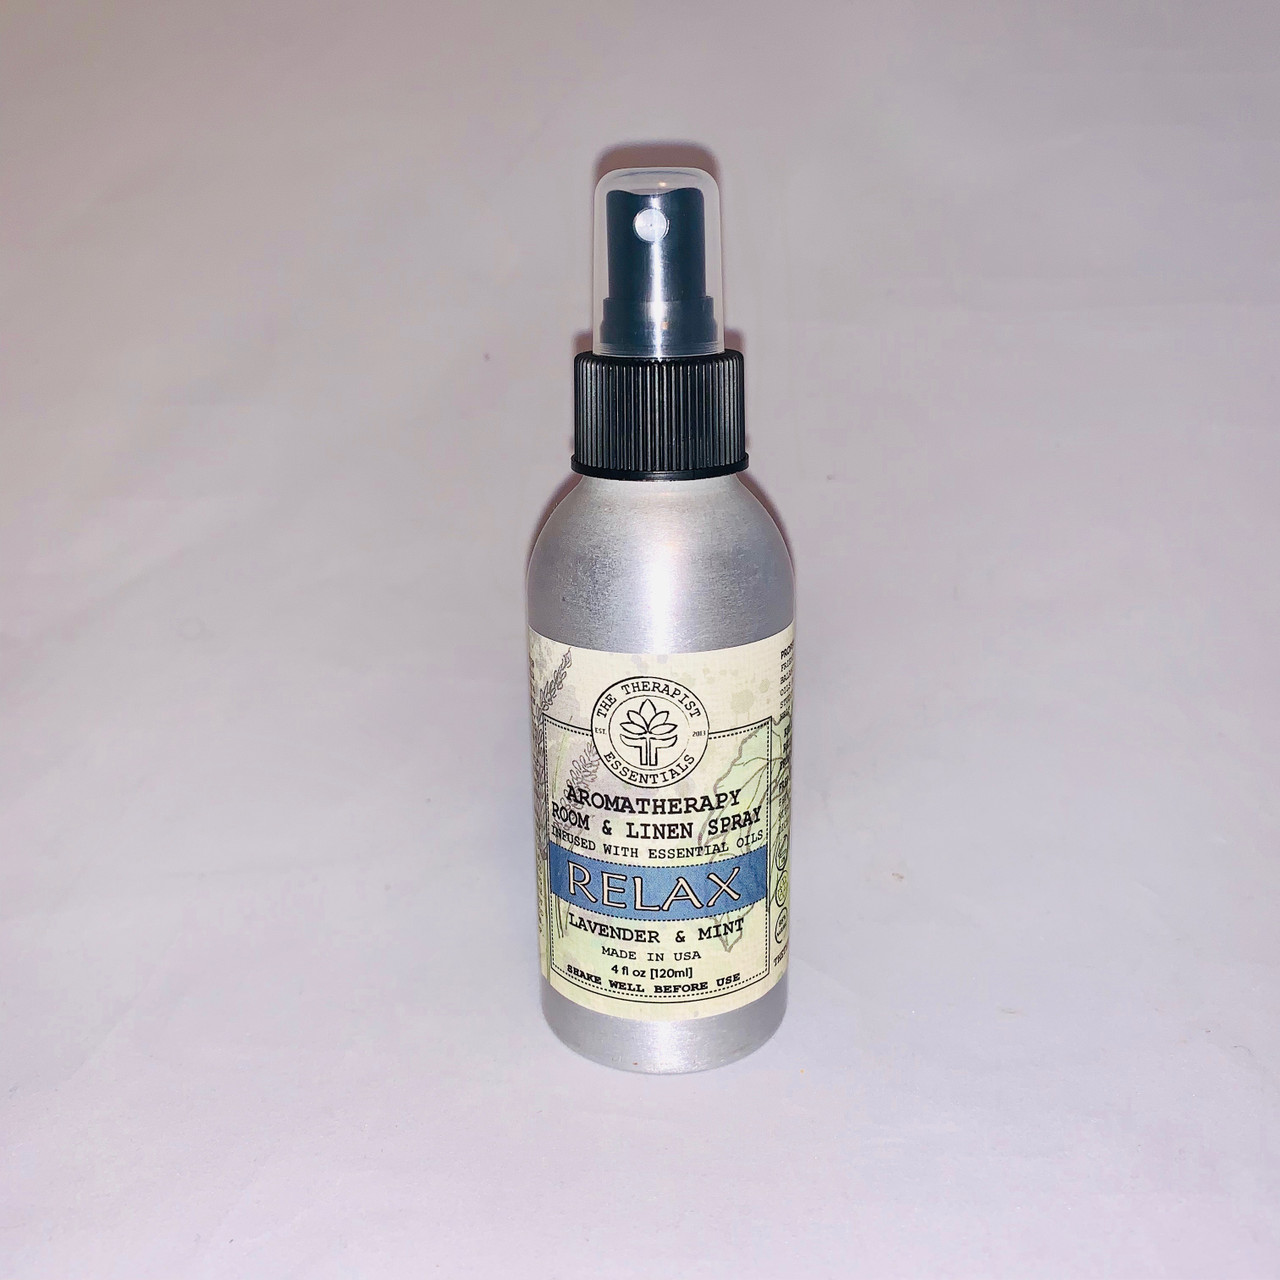 Lavender Essential Oil Room Spray by Tailored Soap